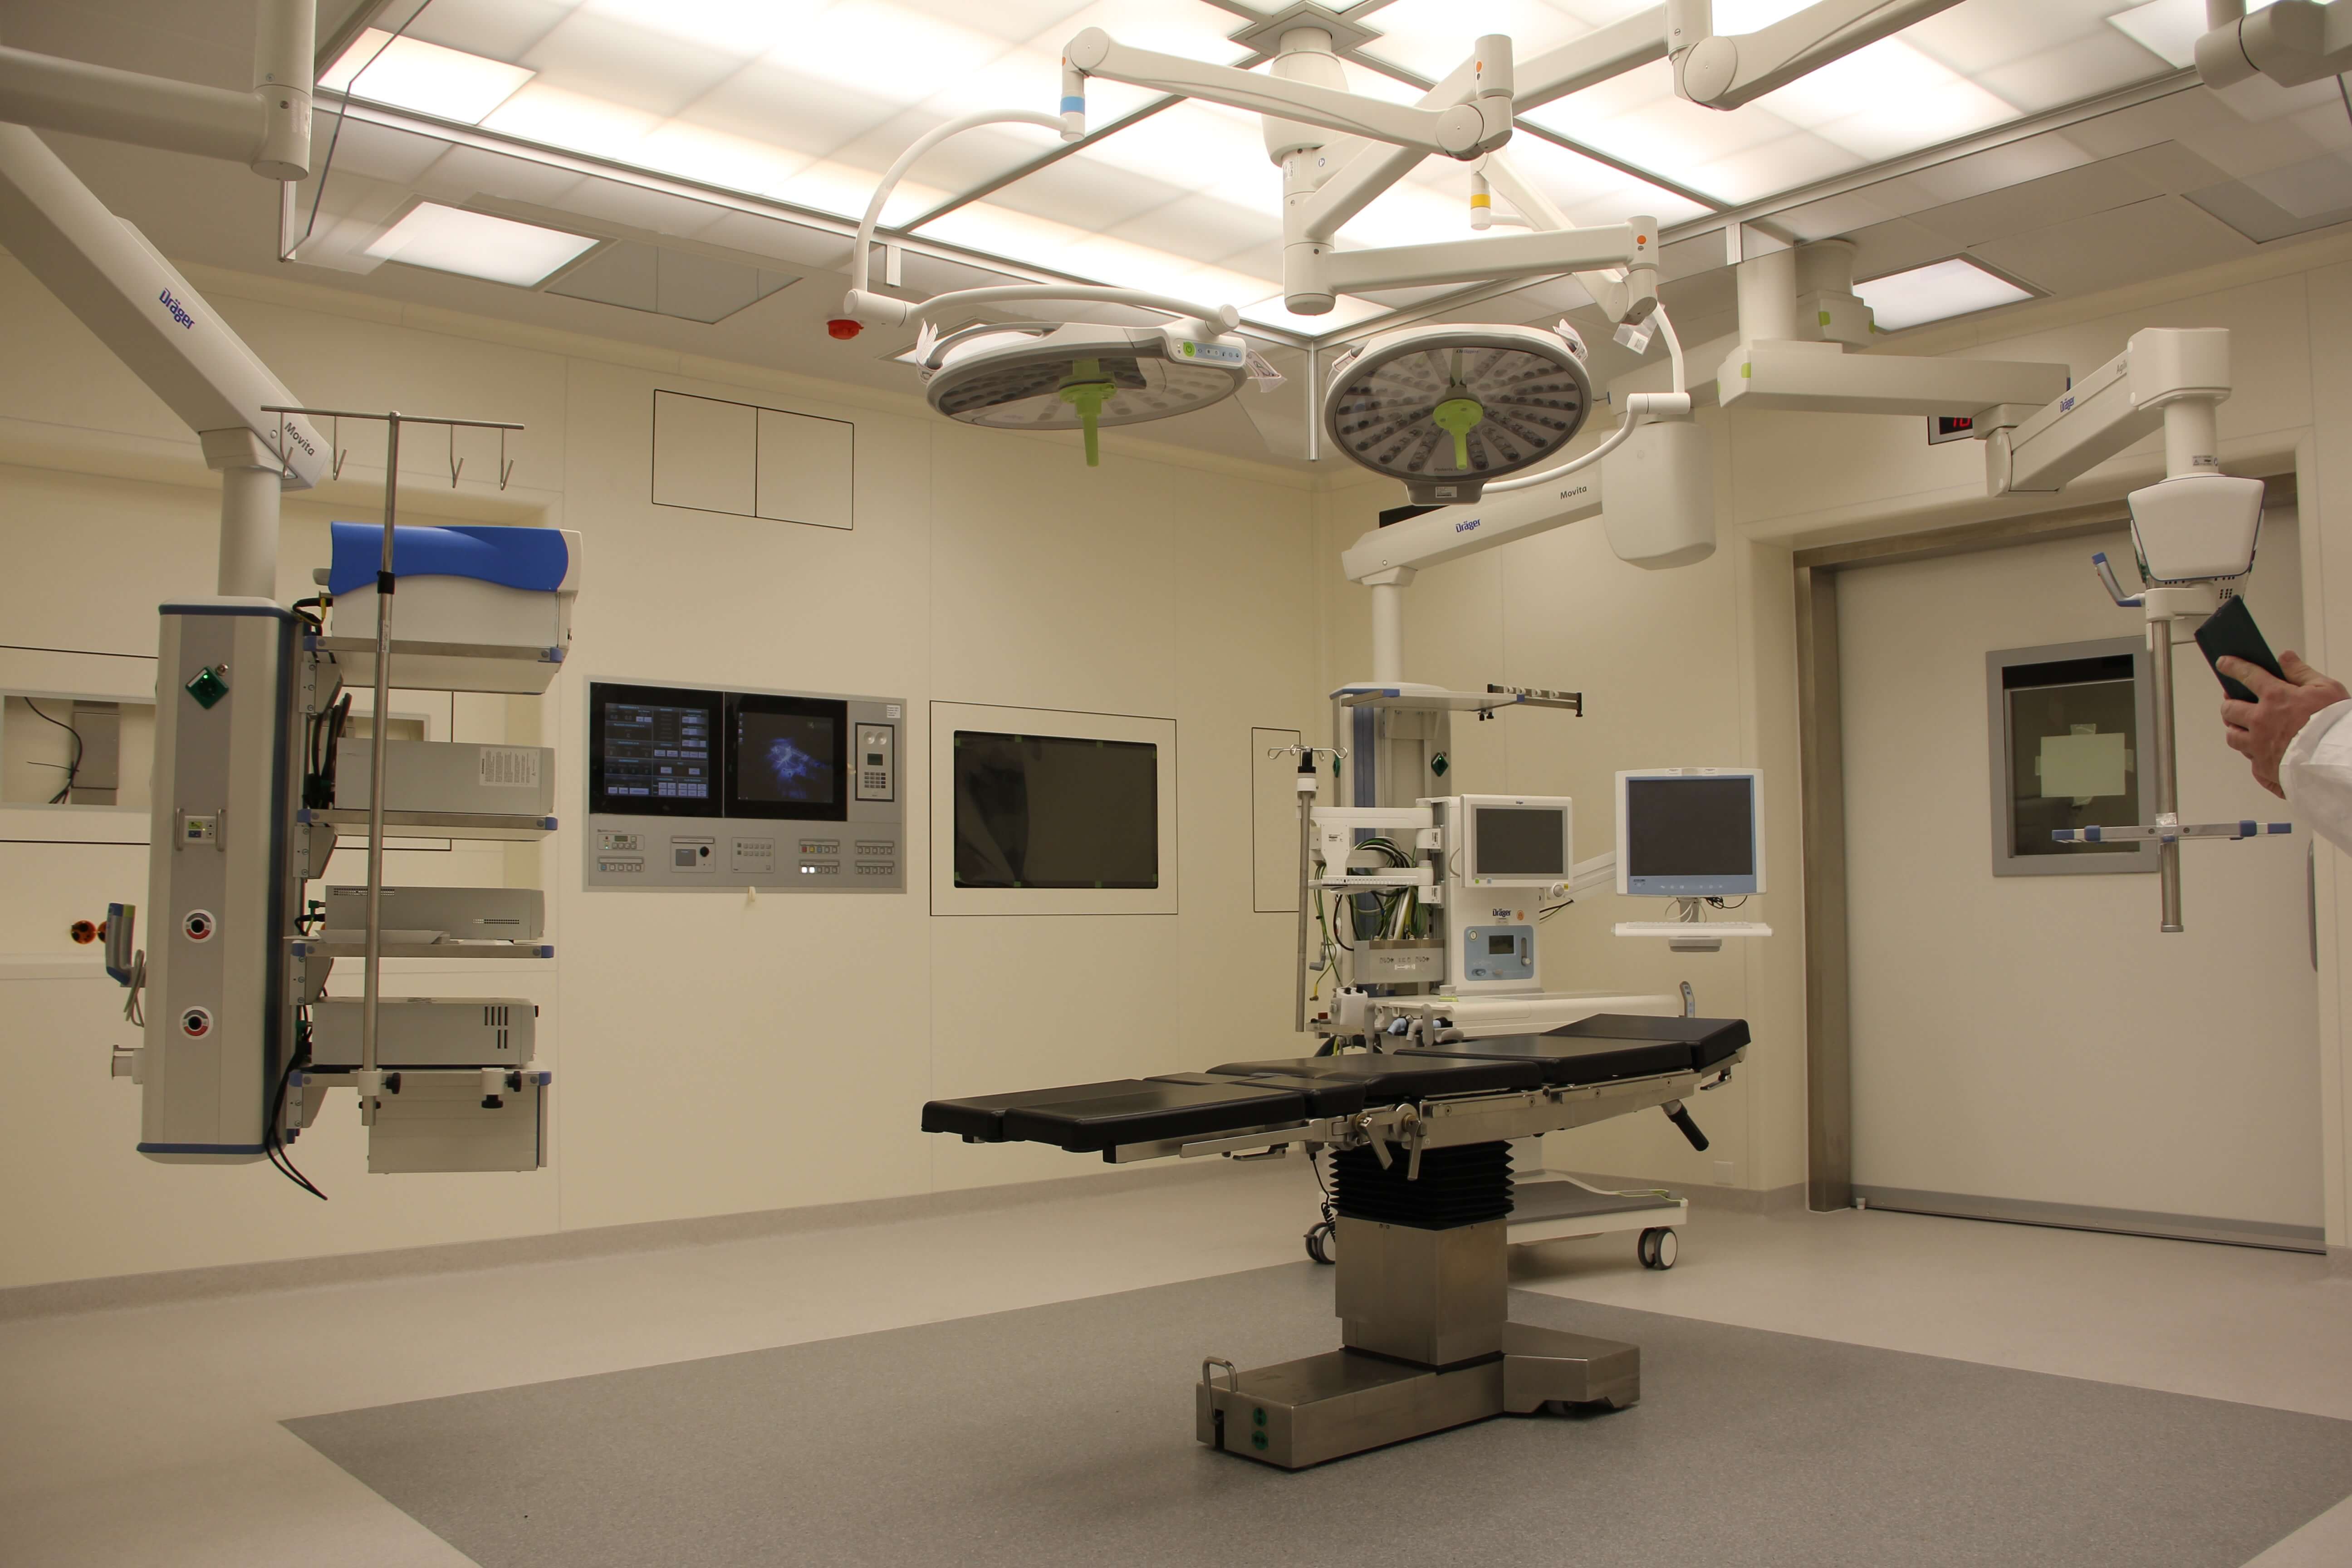 Embedded systems in hospitals